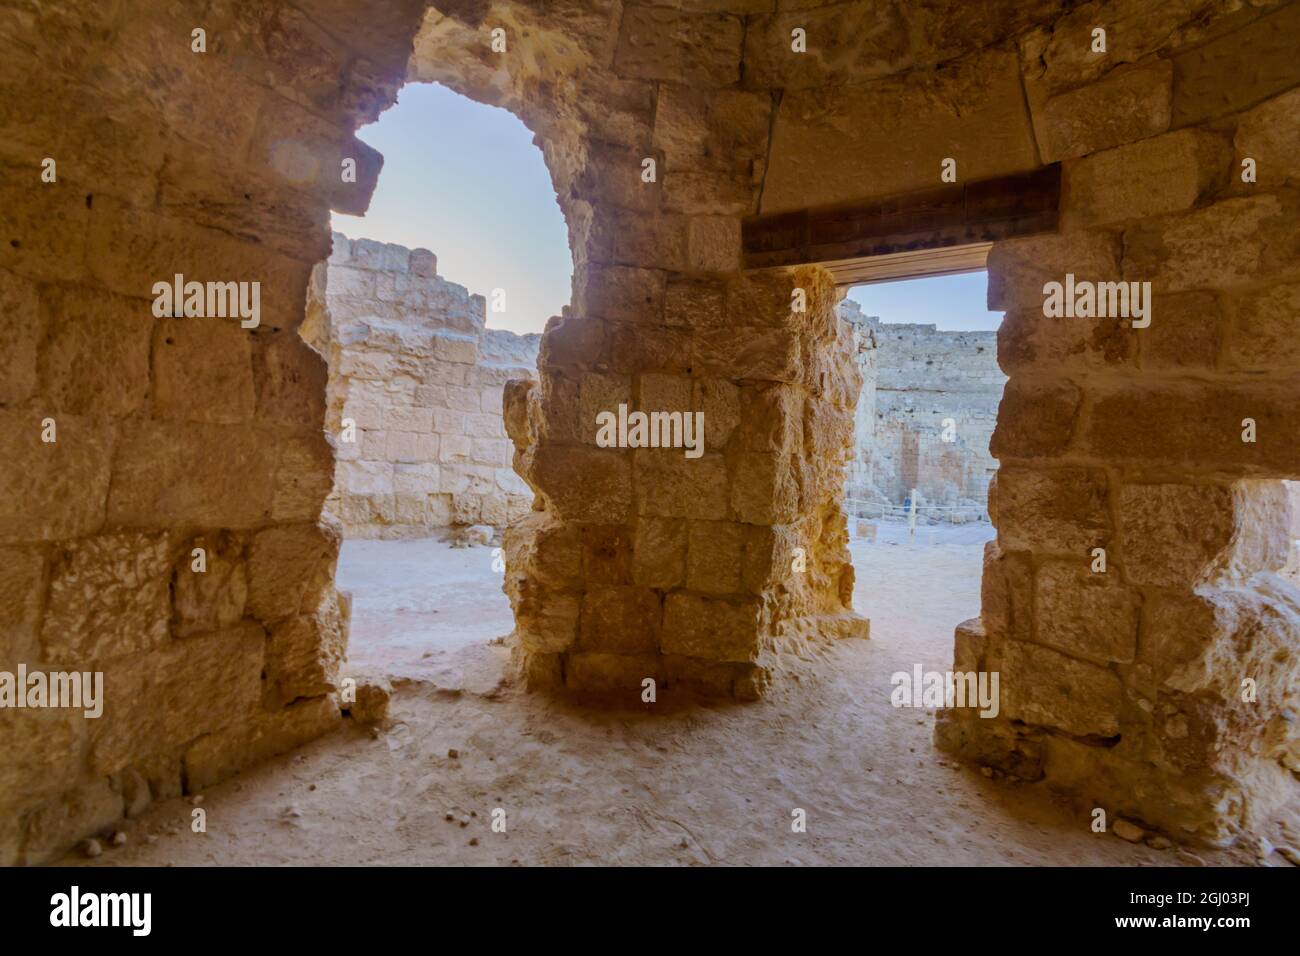 Herodium, West Bank - August 30, 2021: View of ancient buildings in the Upper Herodium Fortress and Palace, the West Bank, South of Jerusalem Stock Photo